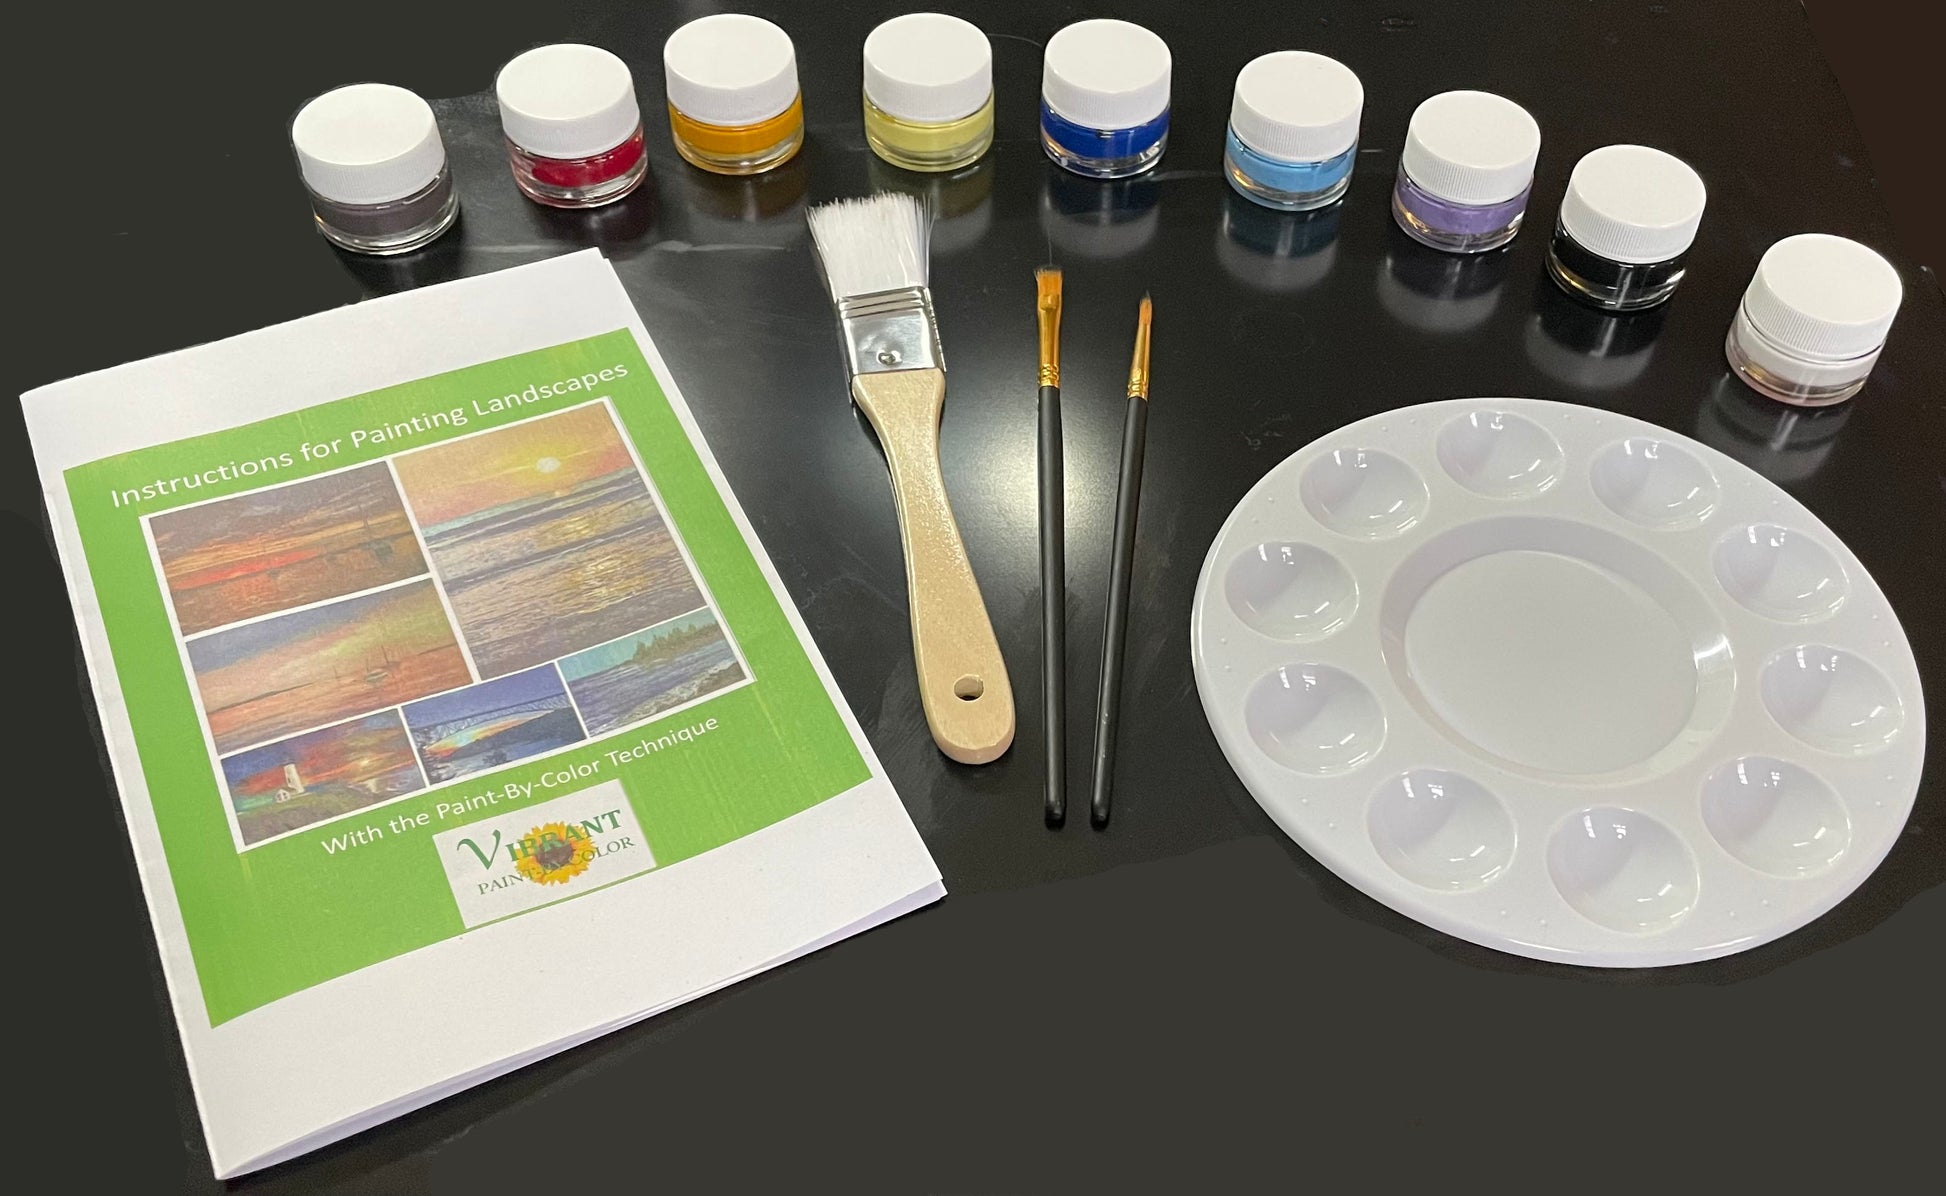 Each kit comes with the appropriate colors, at least 3 brushes and an instruction booklet sharing the appropriate technique